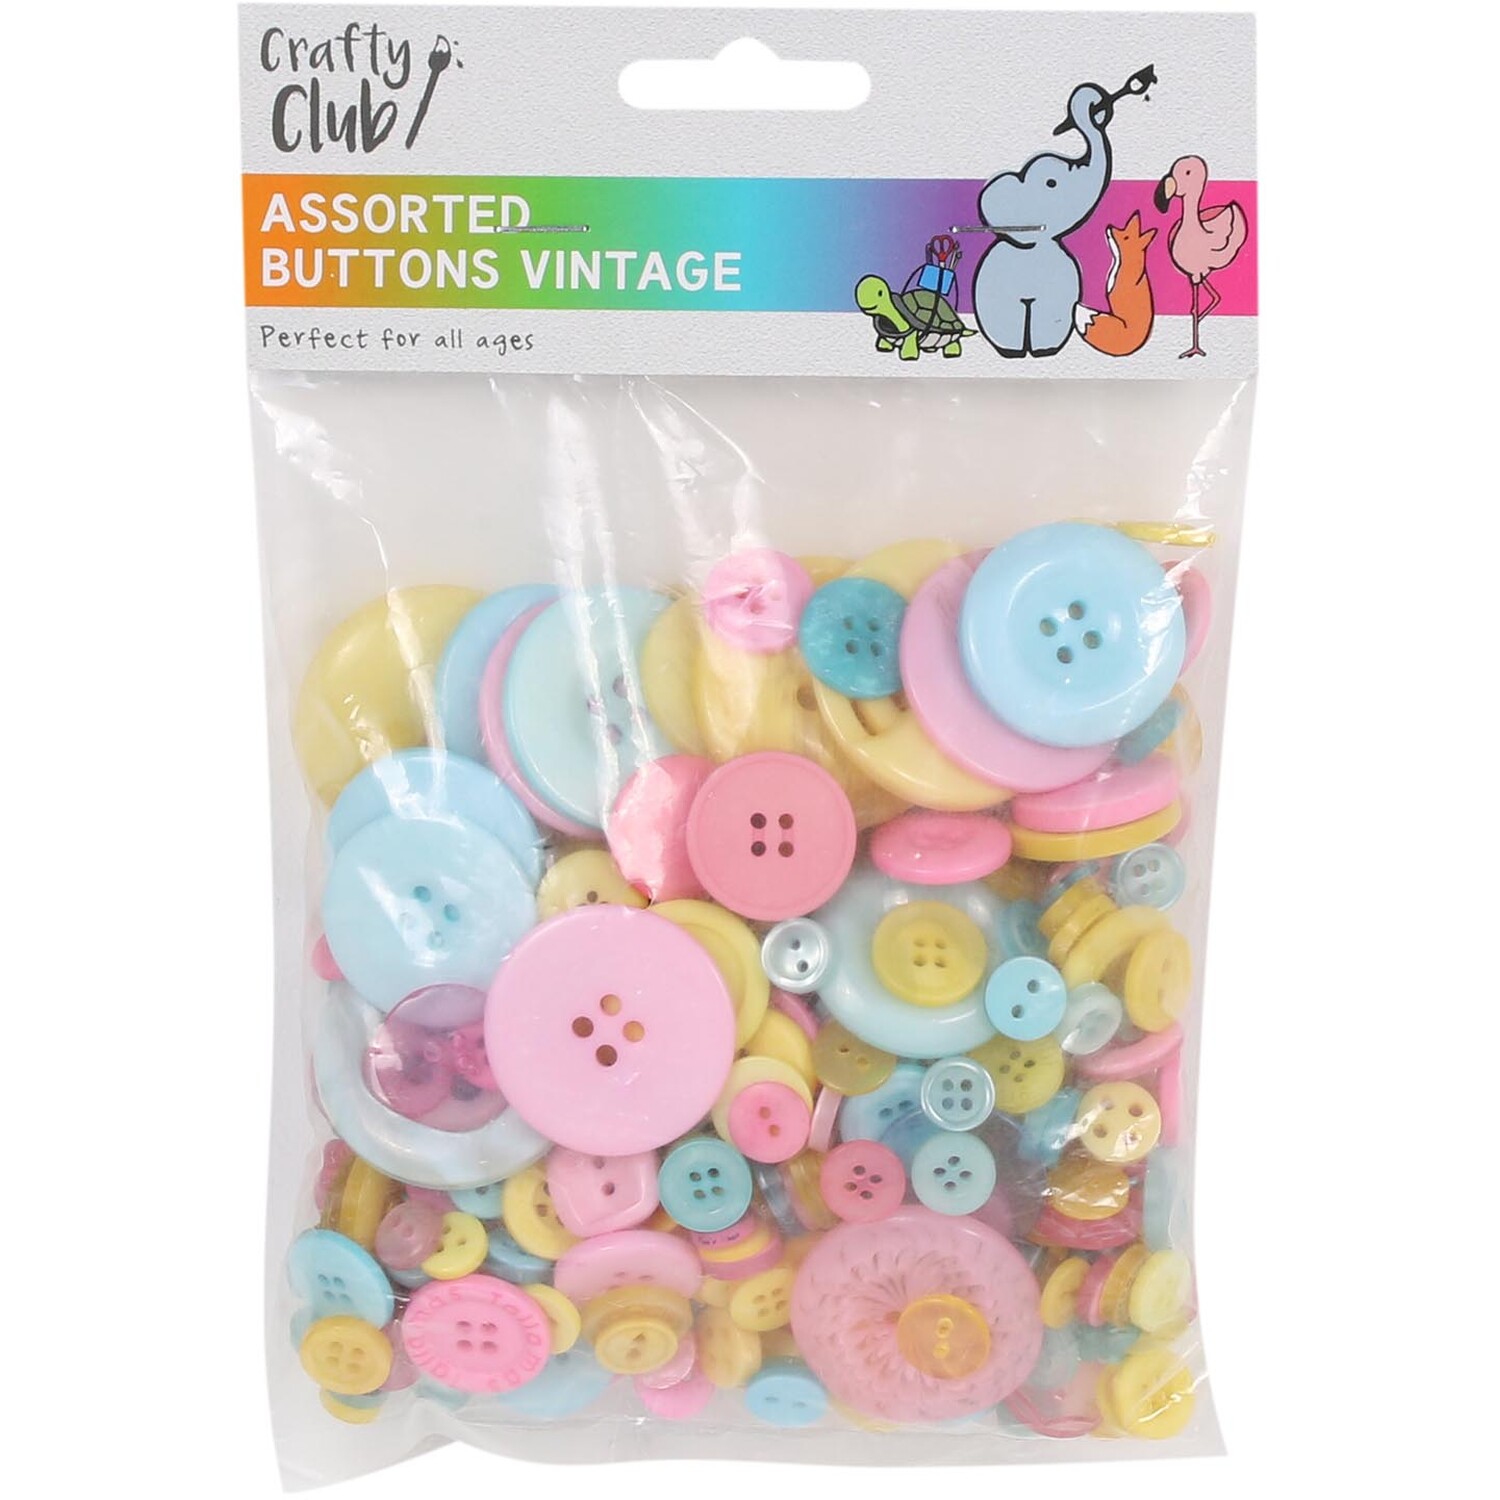 Crafty Club Assorted Buttons - Neon Image